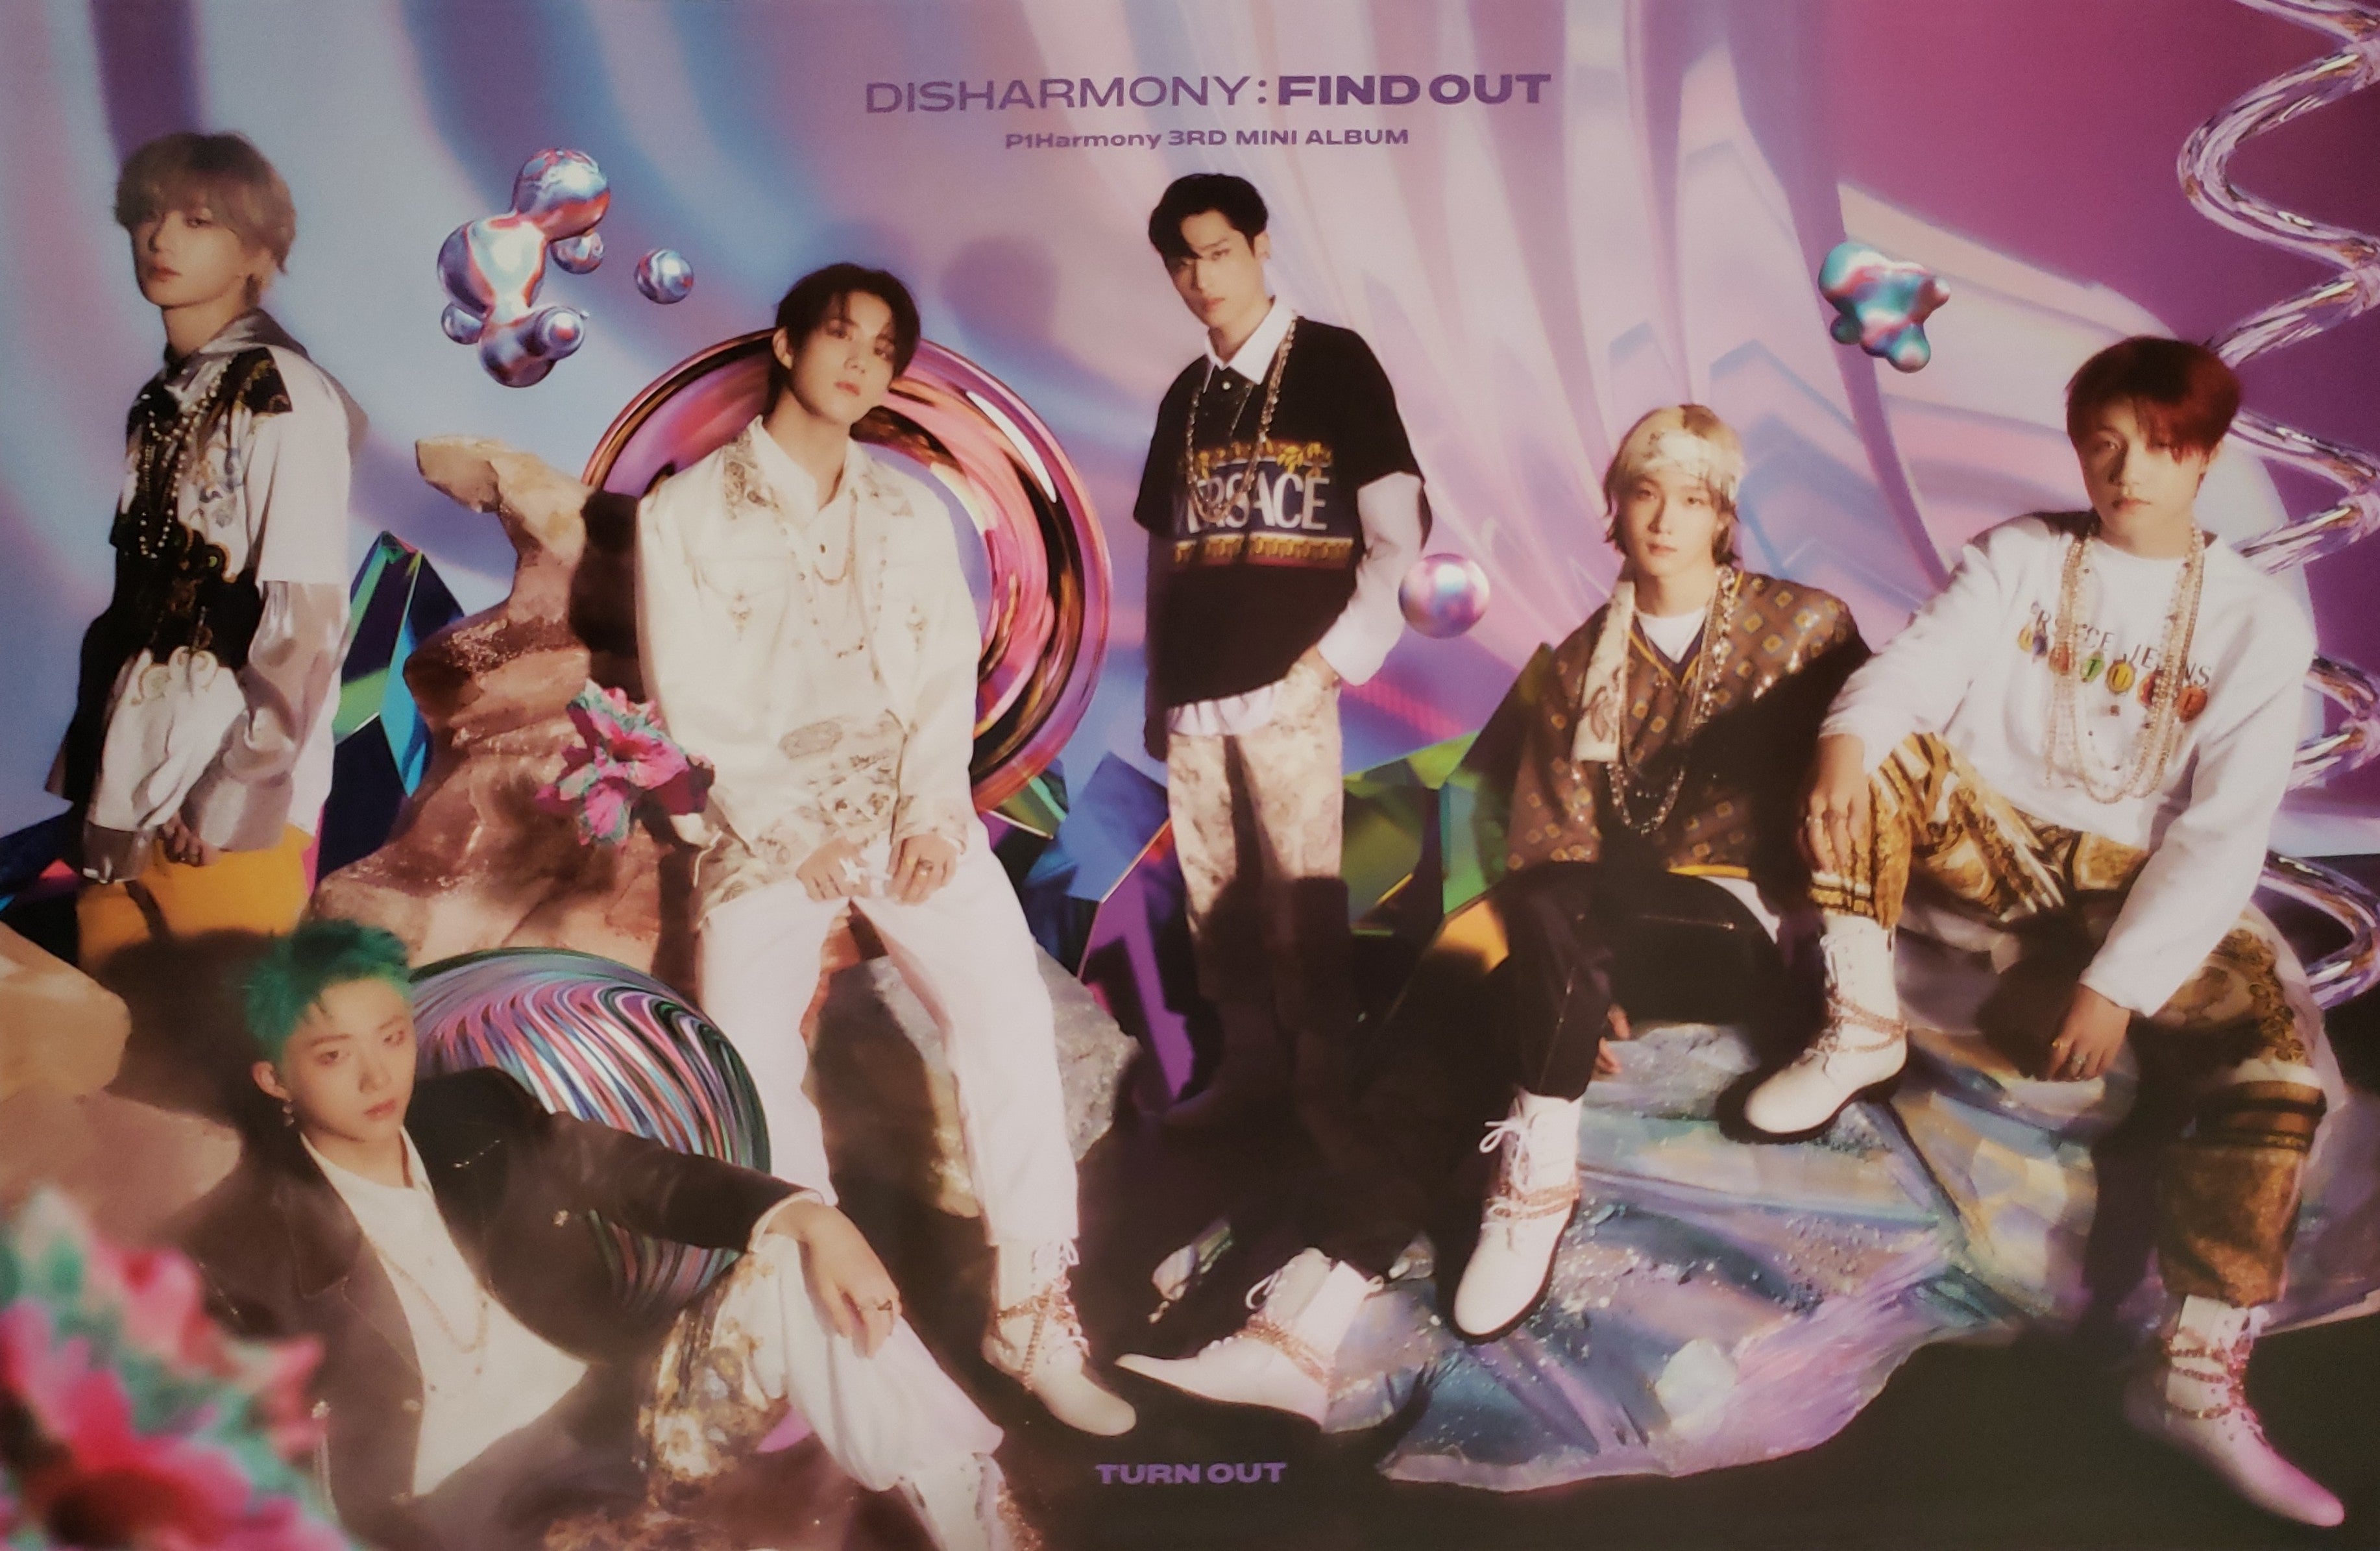 P1Harmony 3rd Mini Album Disharmony: Find Out Official Poster